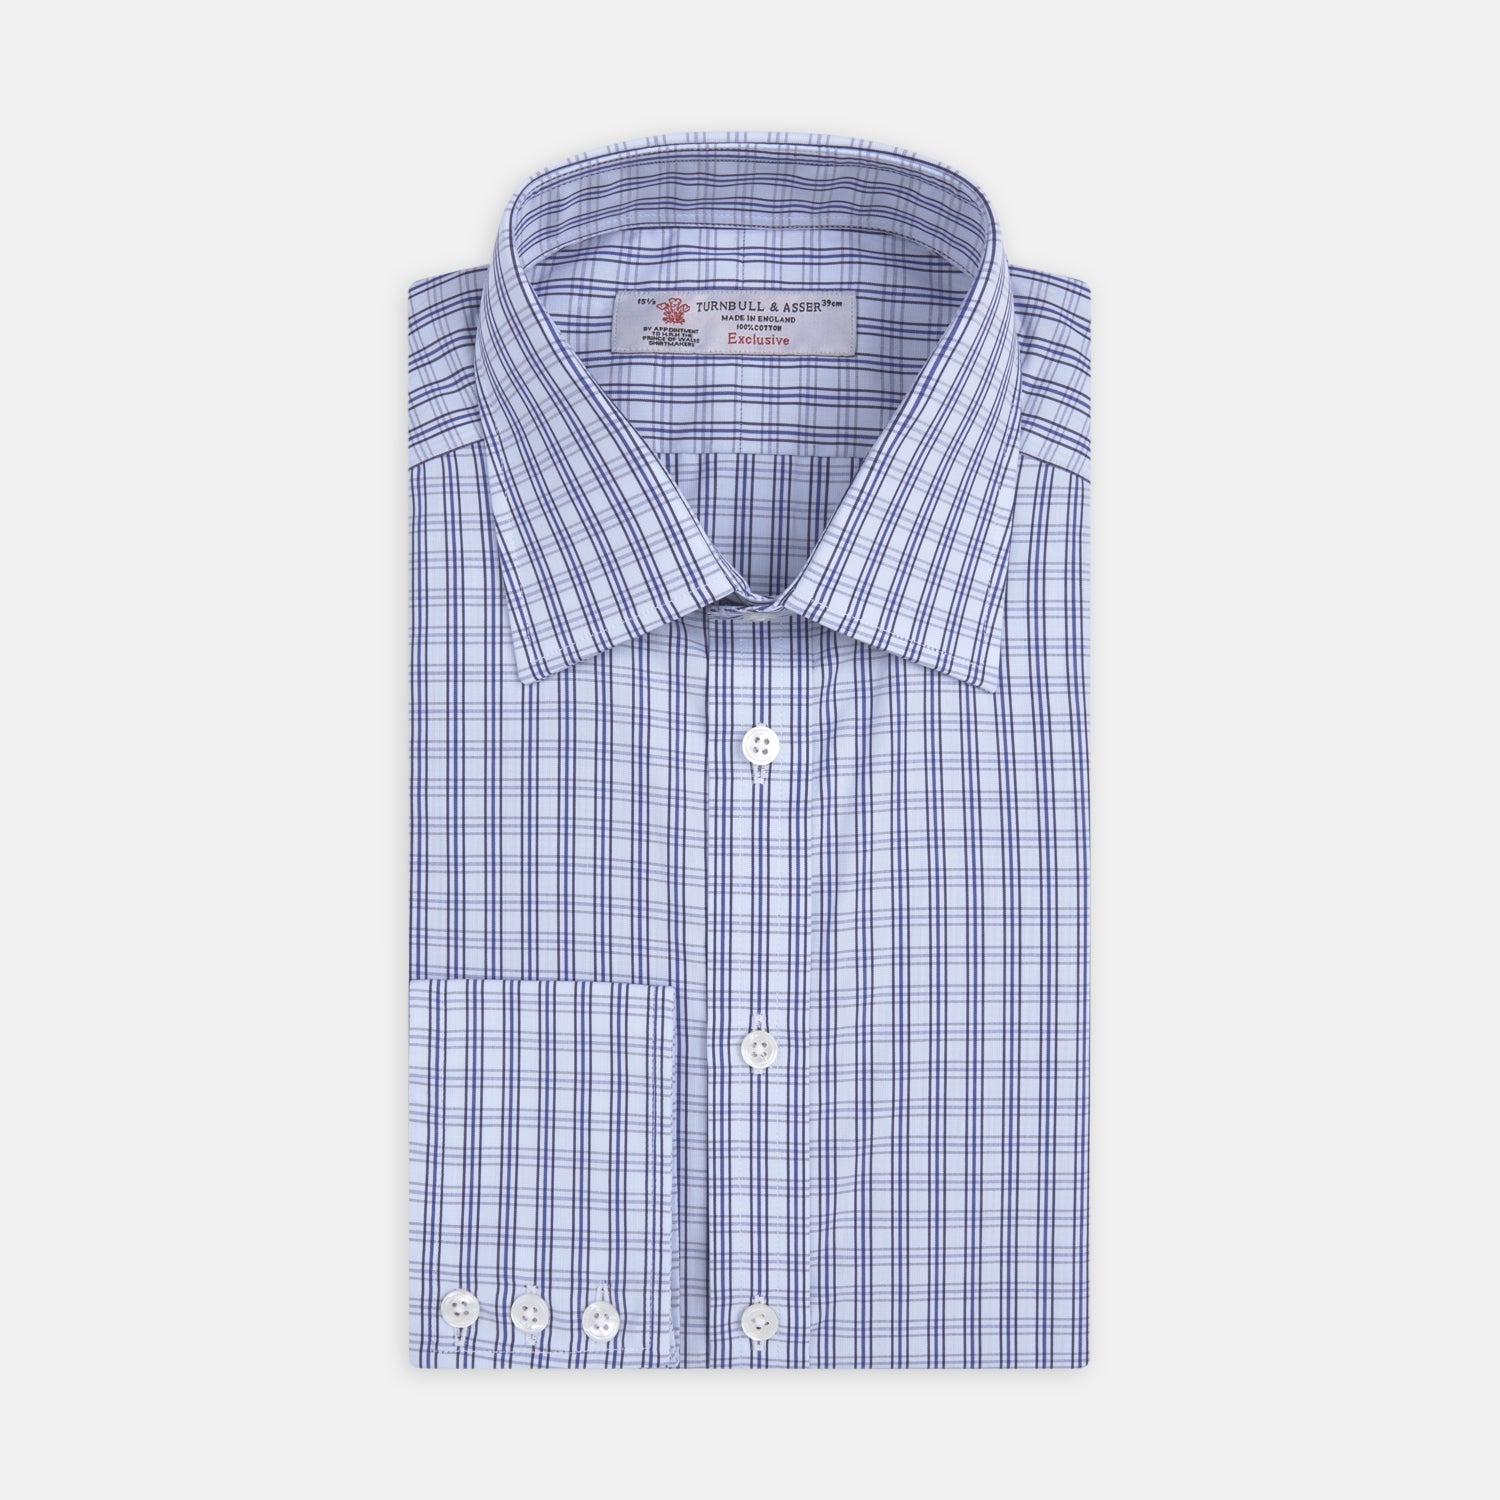 Dark Grey and Navy Triple Check Shirt with T&A Collar and Button Cuffs